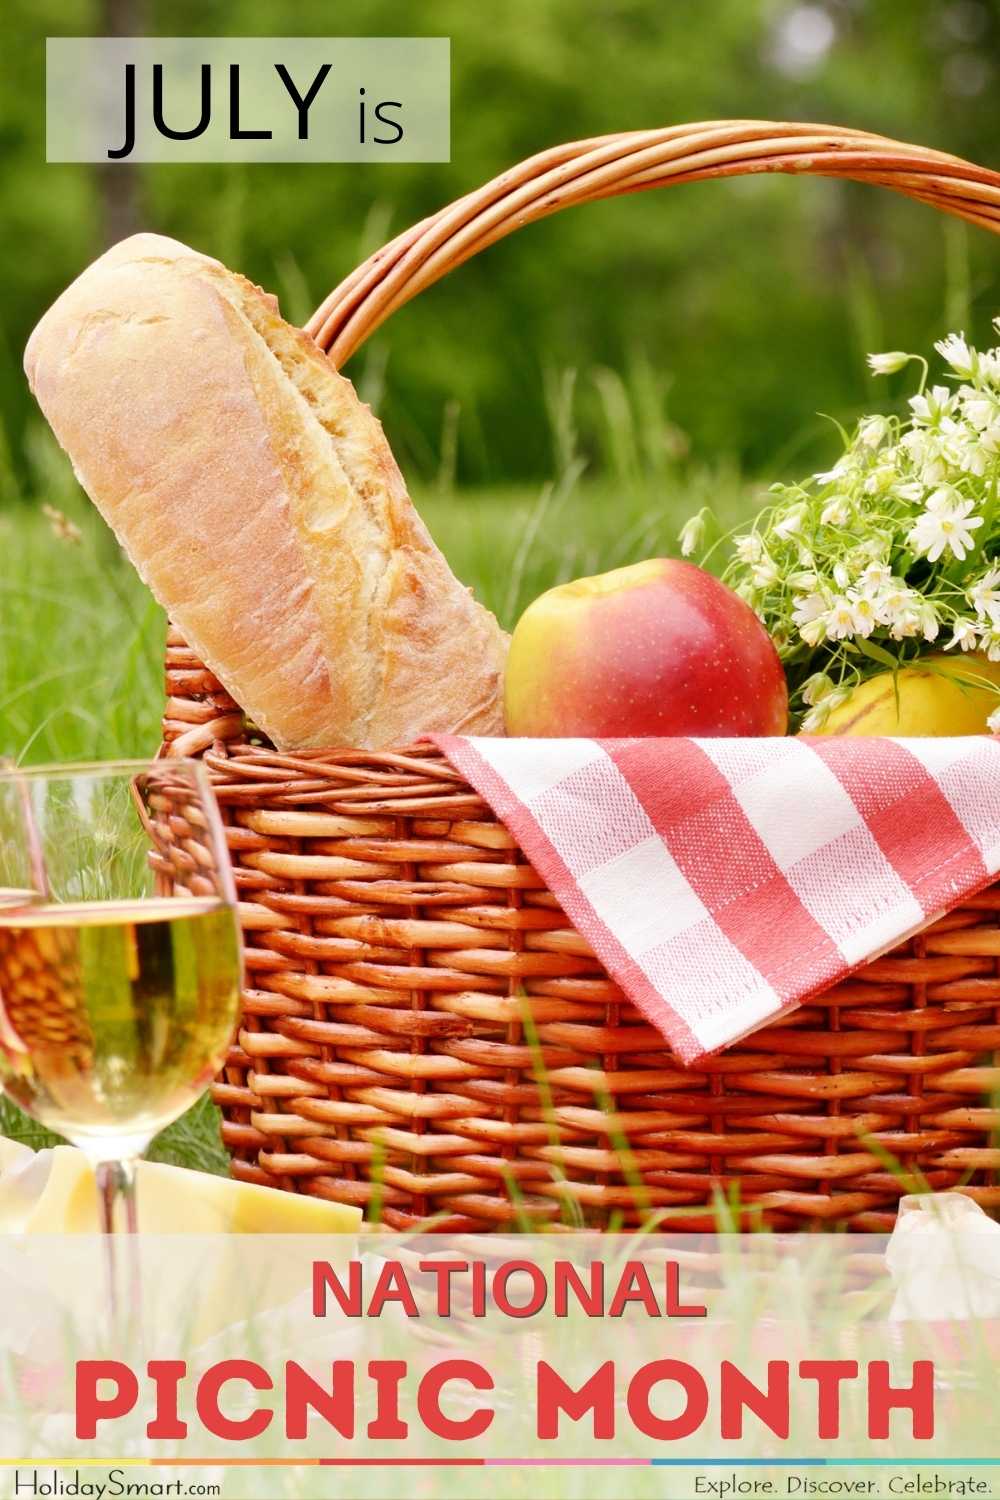 July is Picnic Month